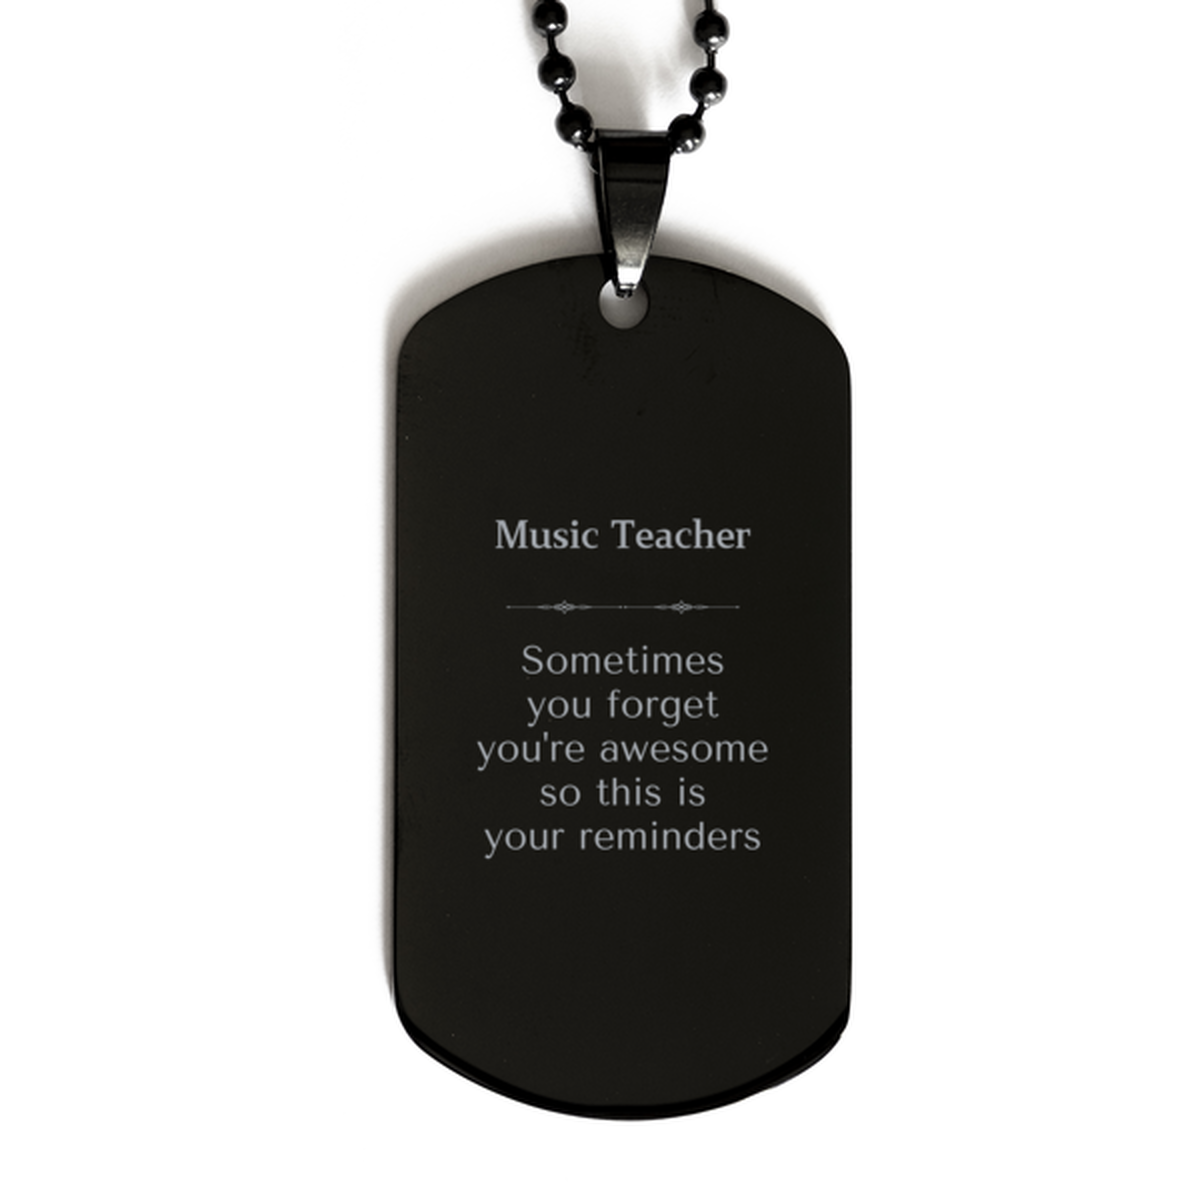 Sentimental Music Teacher Black Dog Tag, Music Teacher Sometimes you forget you're awesome so this is your reminders, Graduation Christmas Birthday Gifts for Music Teacher, Men, Women, Coworkers